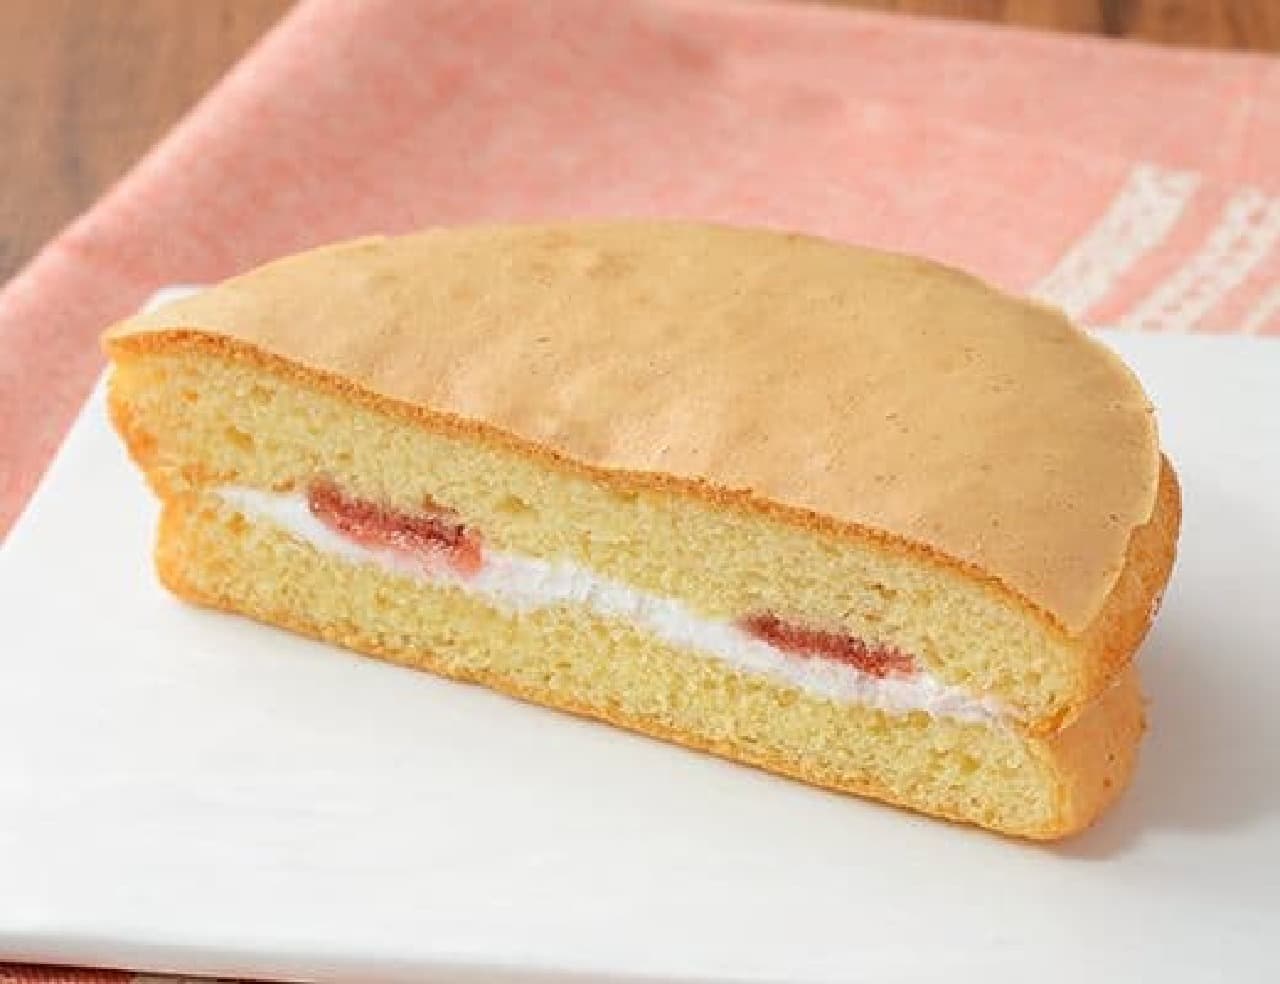 LAWSON "NL Blanc's Fluffy Sandwich Cake with MCT Oil -Including Lactic Acid Bacteria